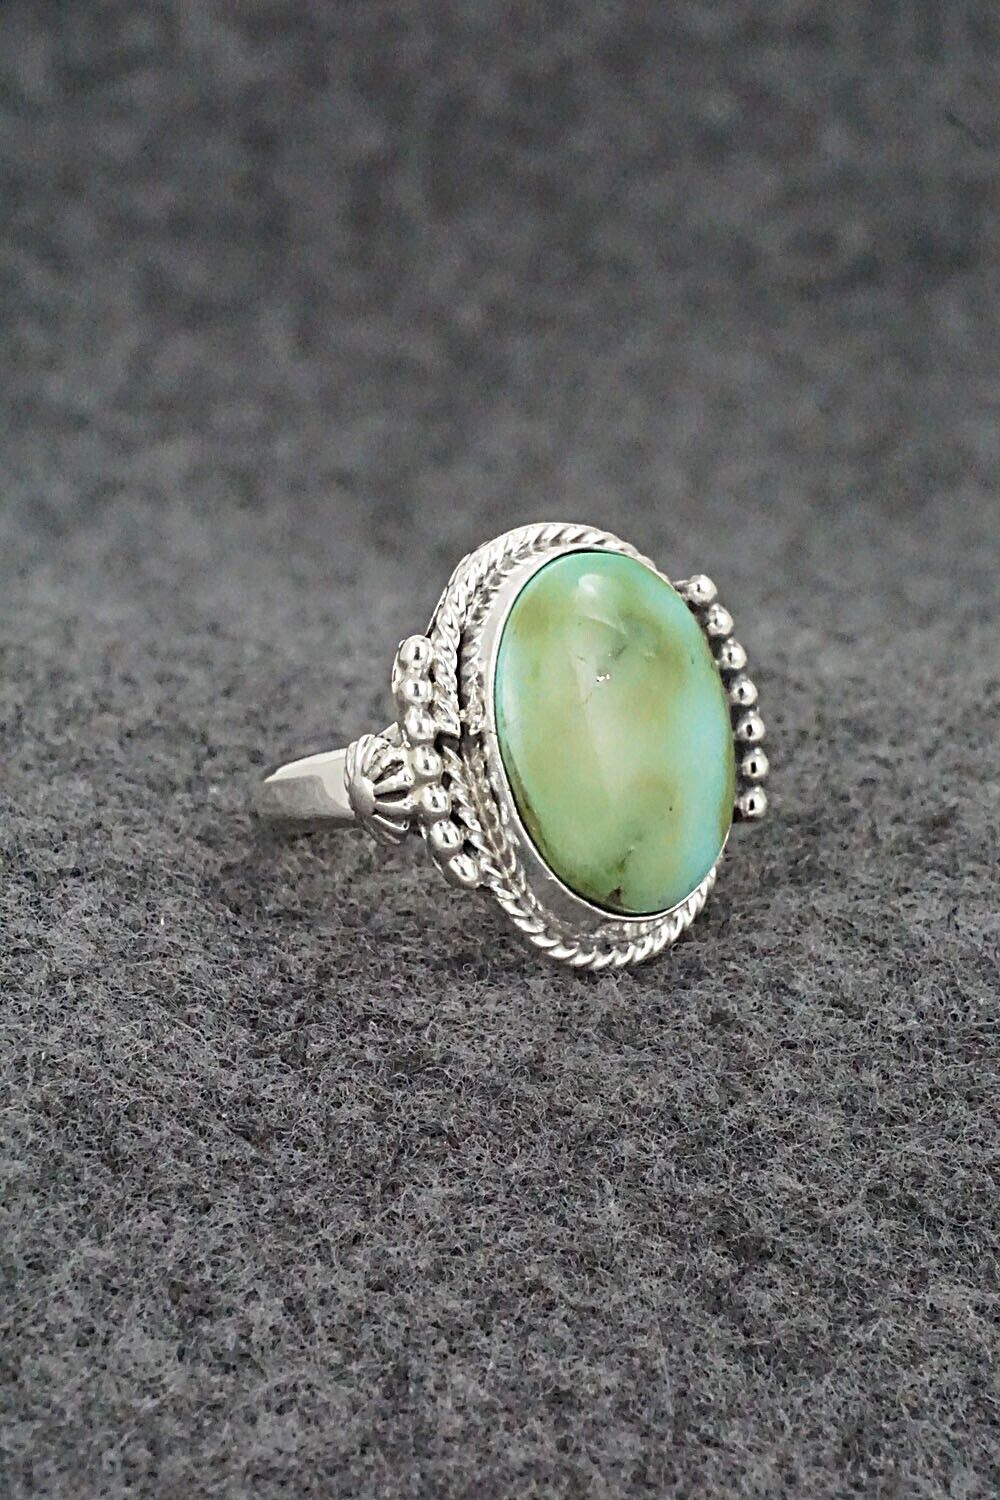 Turquoise & Sterling Silver Ring - Andrew Vandever - Size 5.75